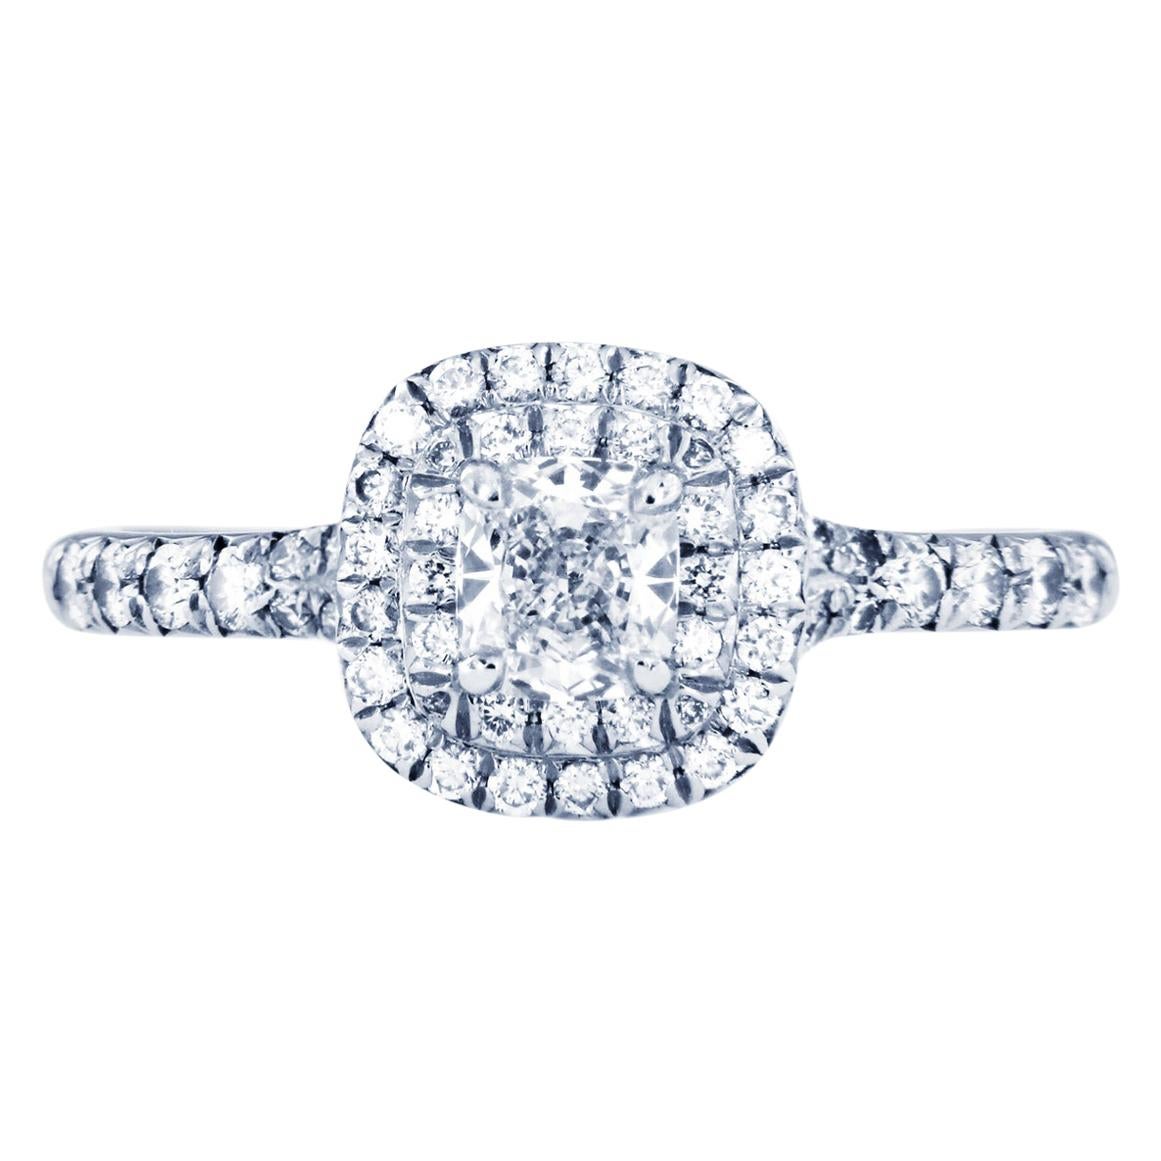 Tiffany & Co. Soleste Double Row Ring in Platinum